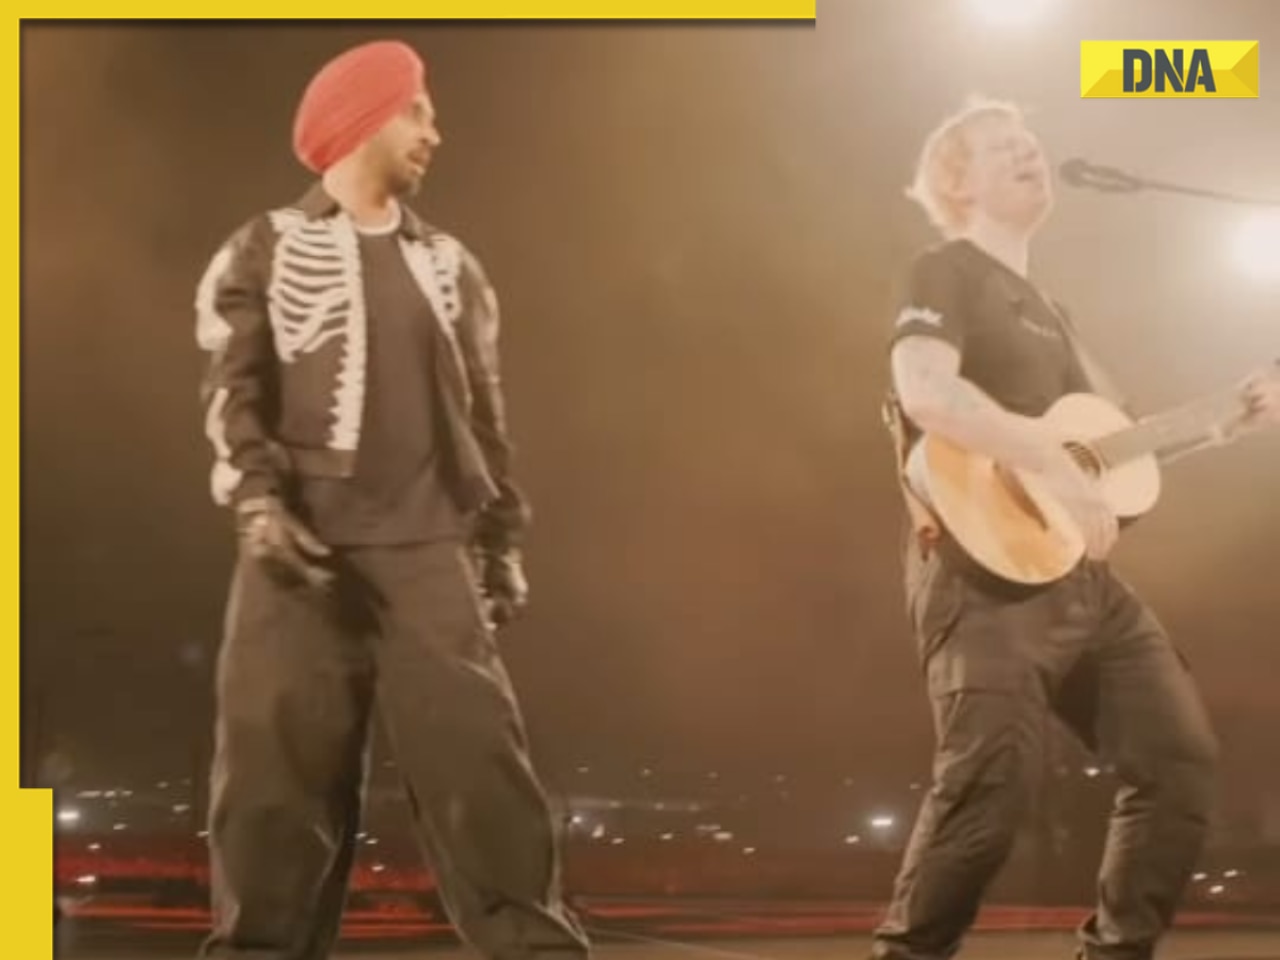 Diljit Dosanjh opens up on sharing stage with Ed Sheeran in Mumbai, getting him to sing in Punjabi: 'Whoever said...'